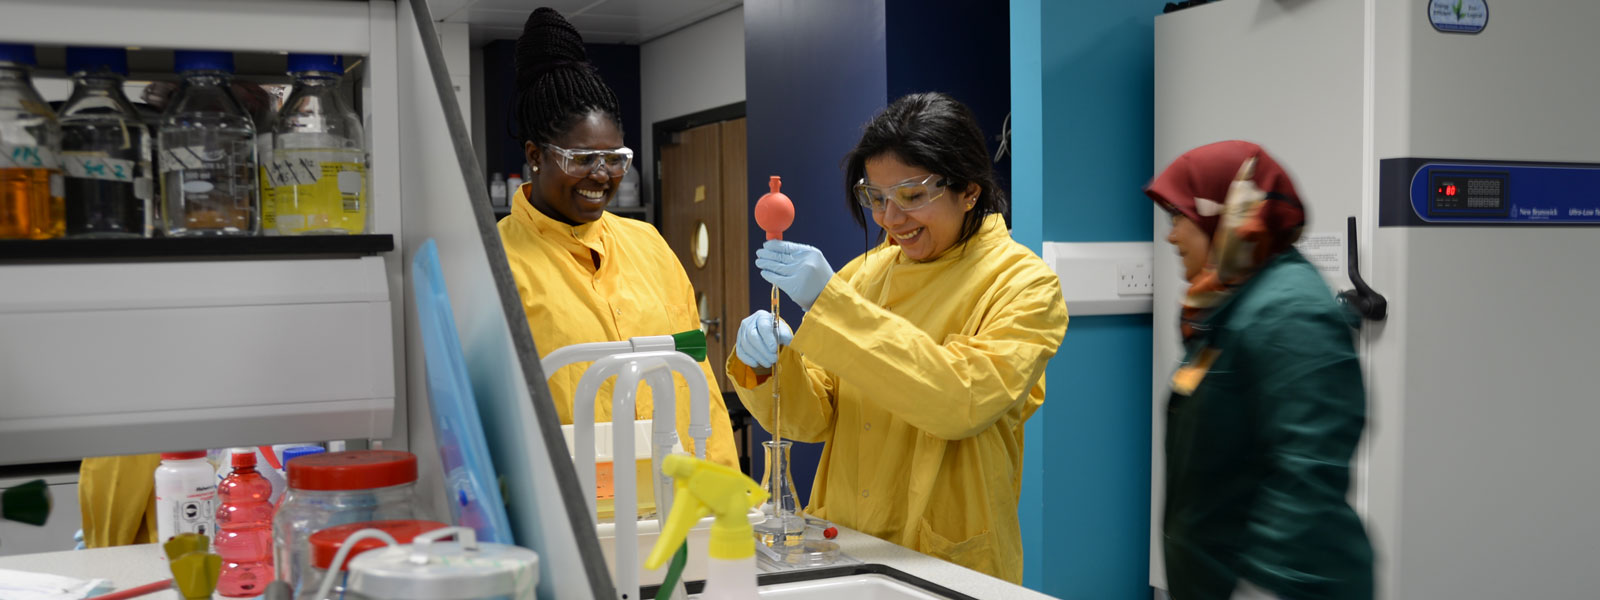 two female students carrying out an experiment